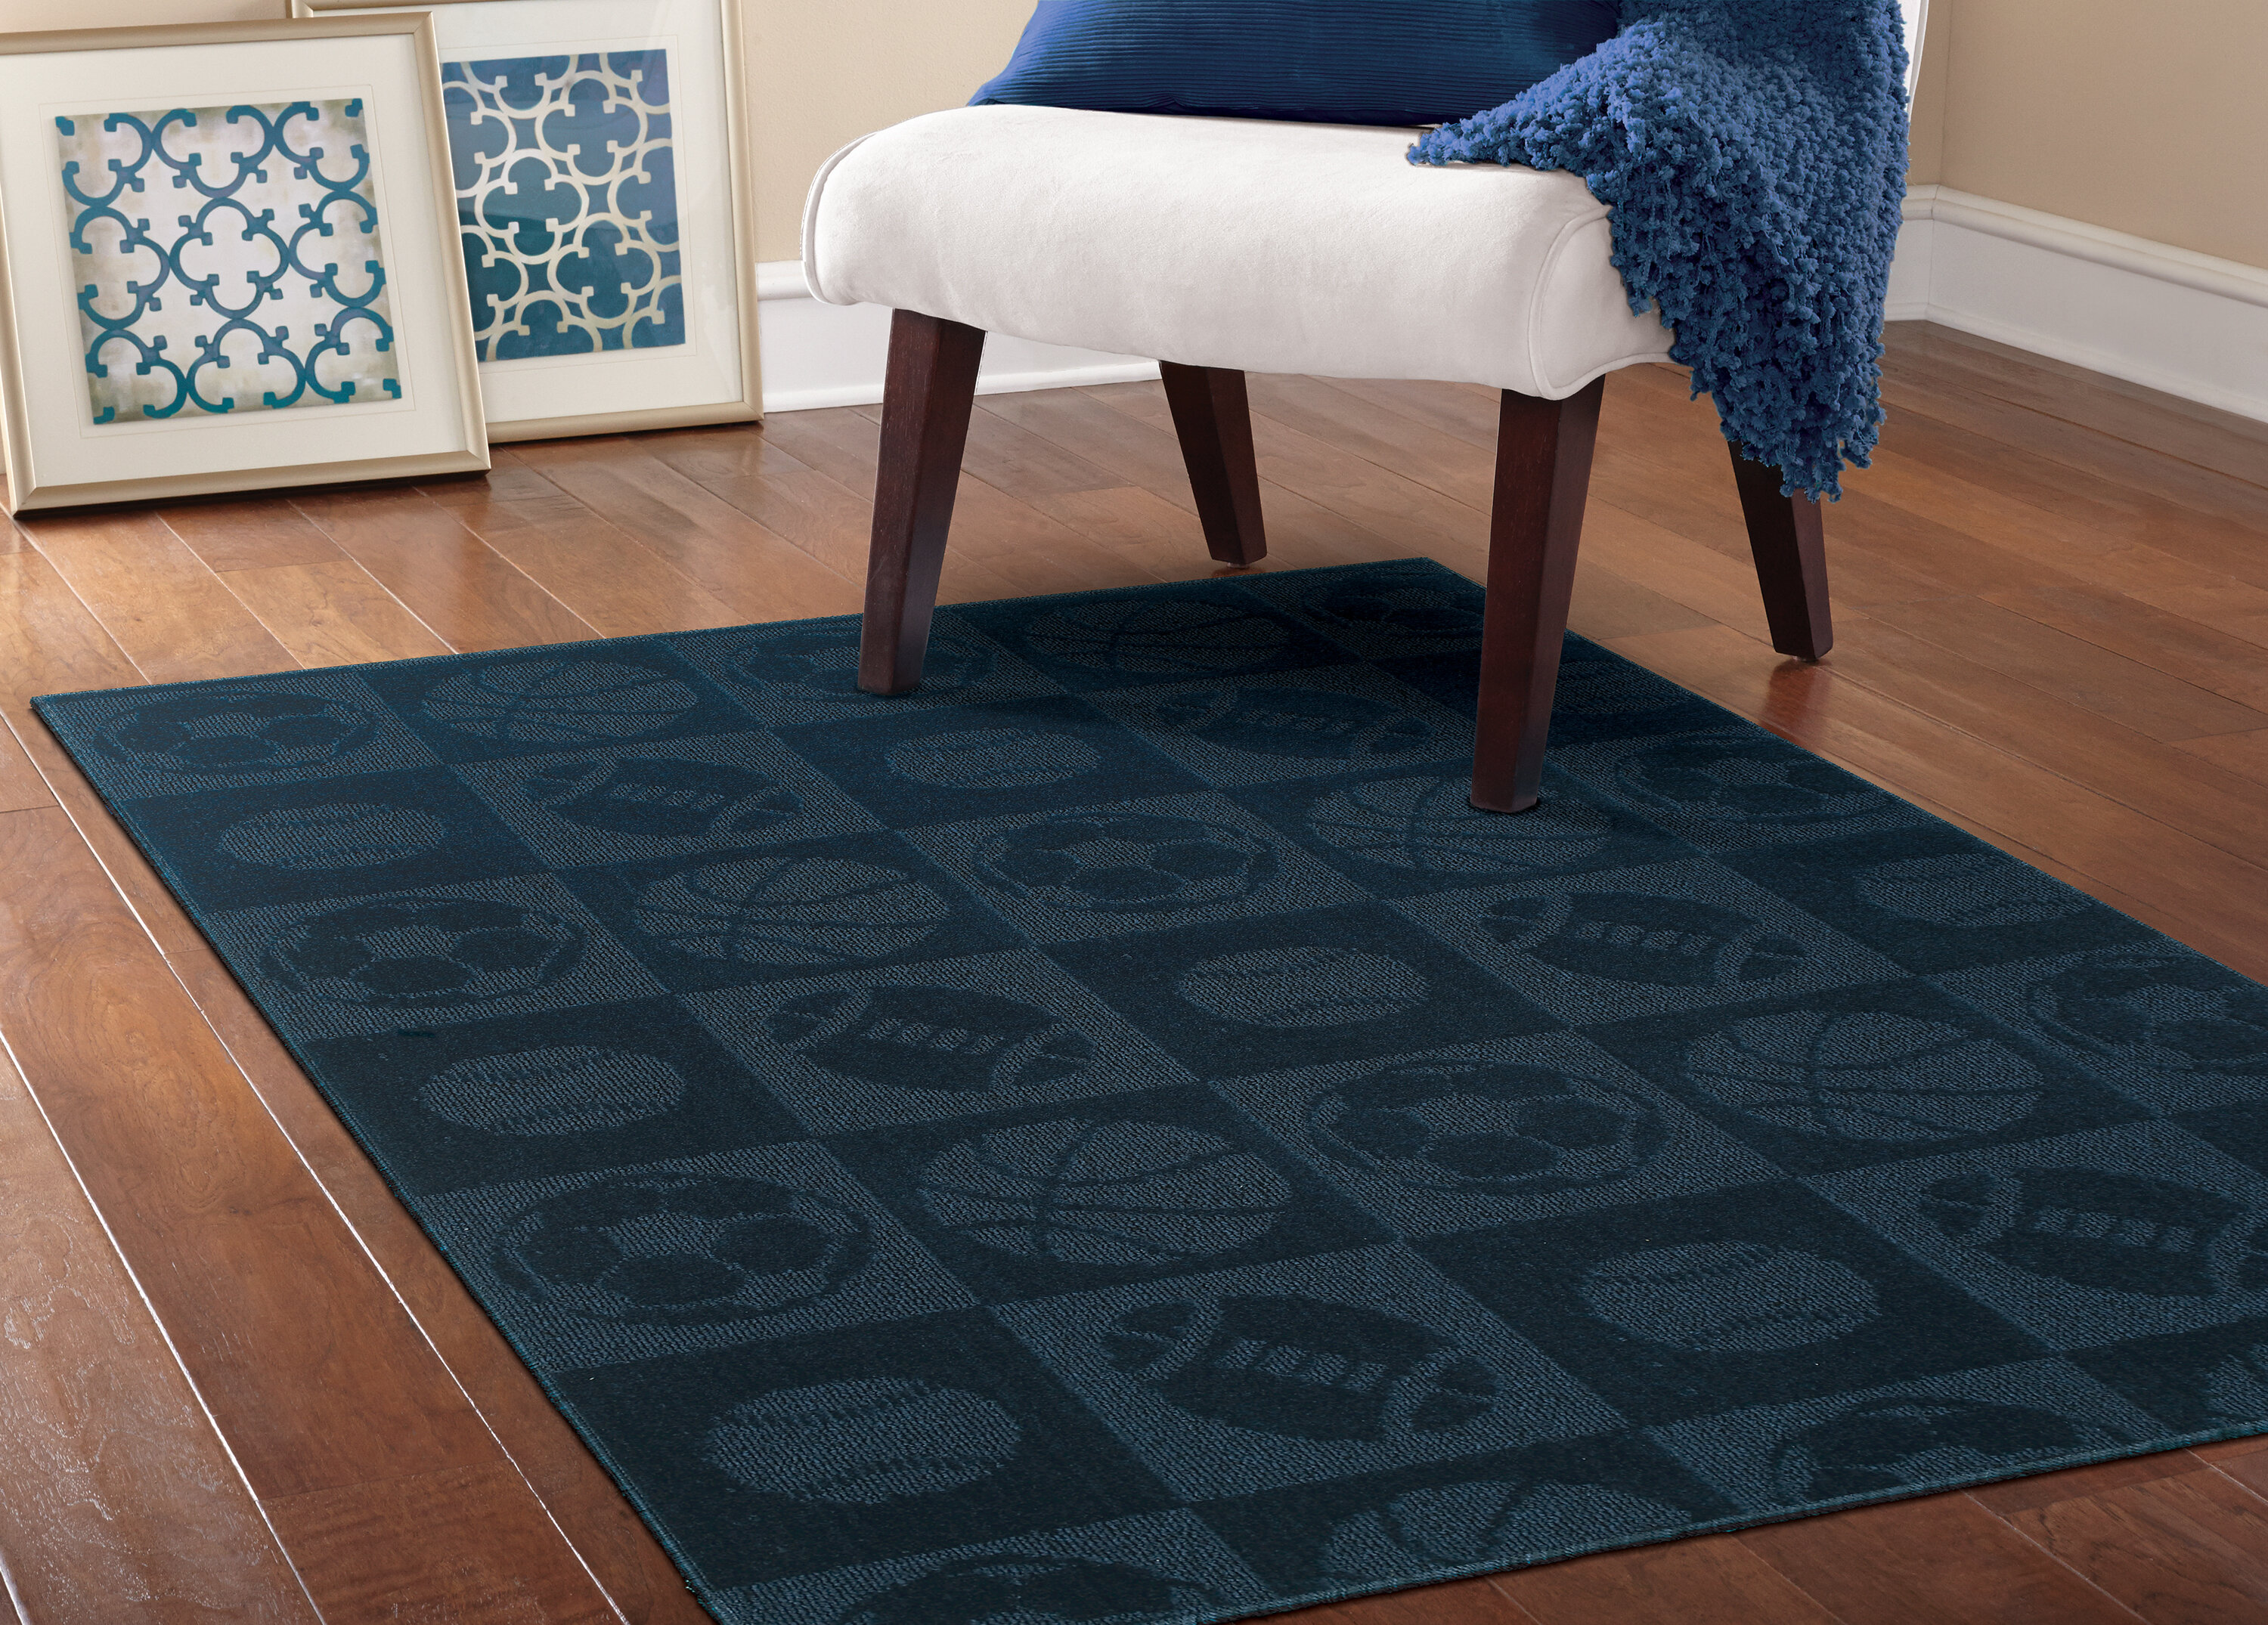 Wayfair | Sports Area Rugs You'll Love in 2022